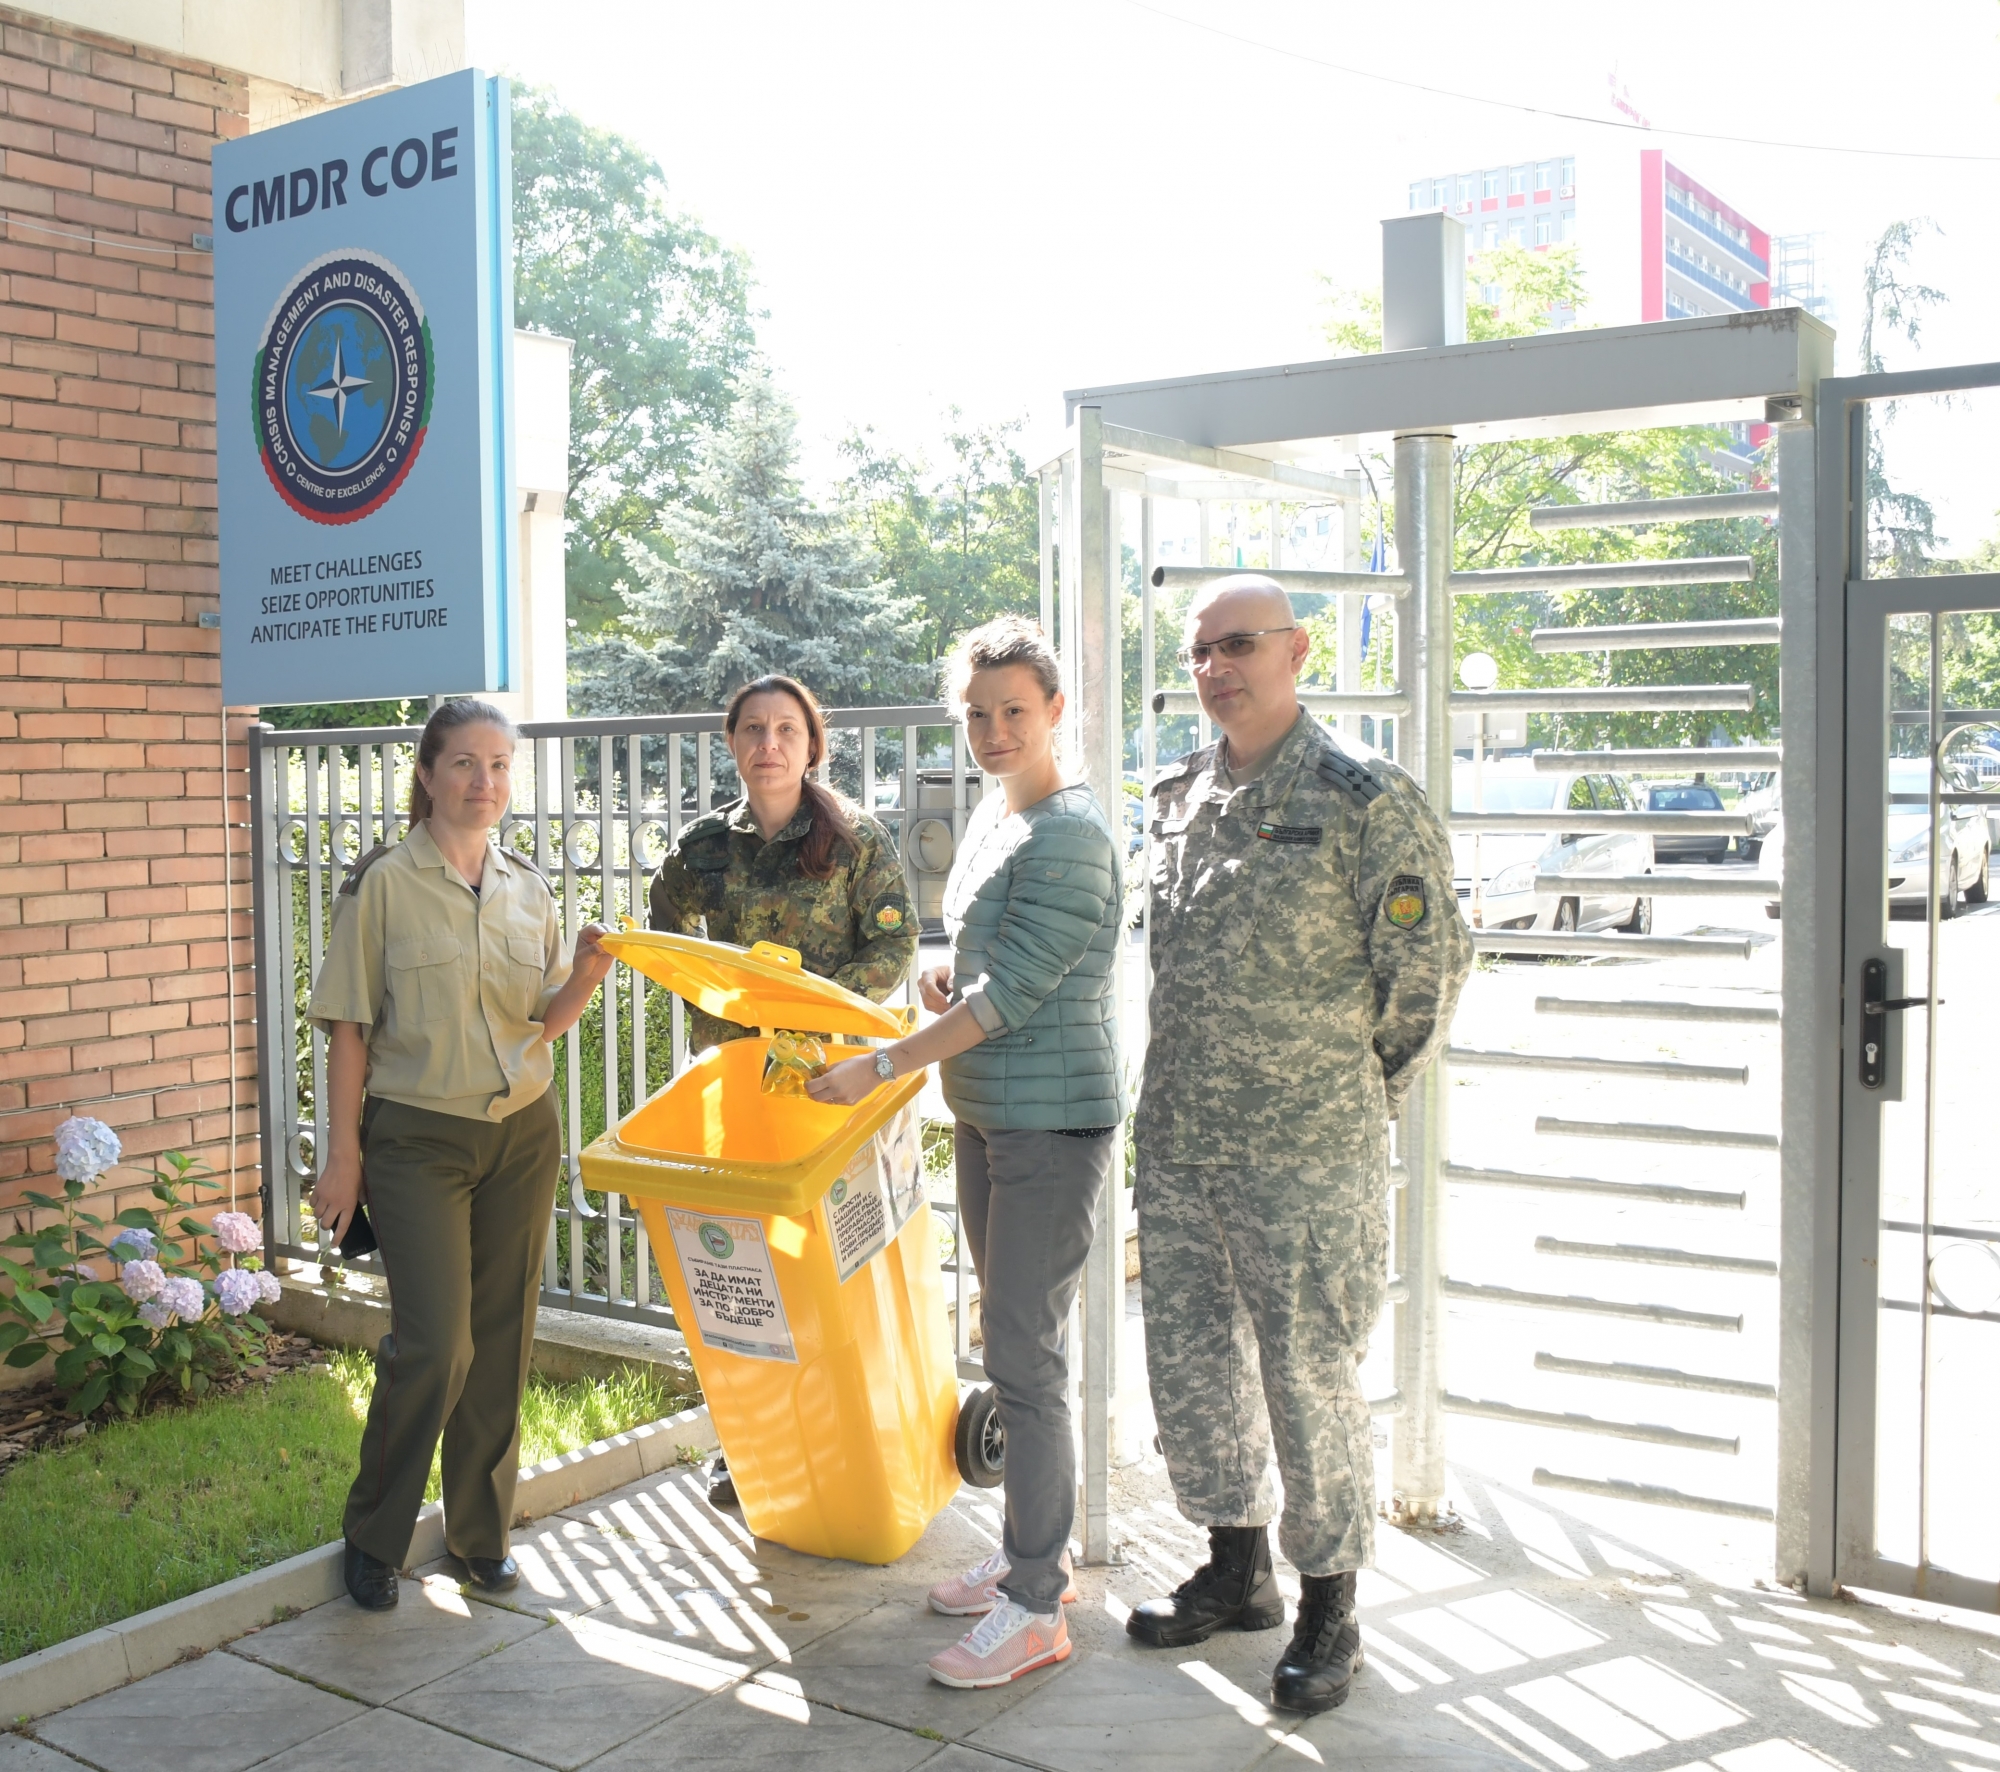 New life for used plastic – CMDR COE launches a recycling initiative